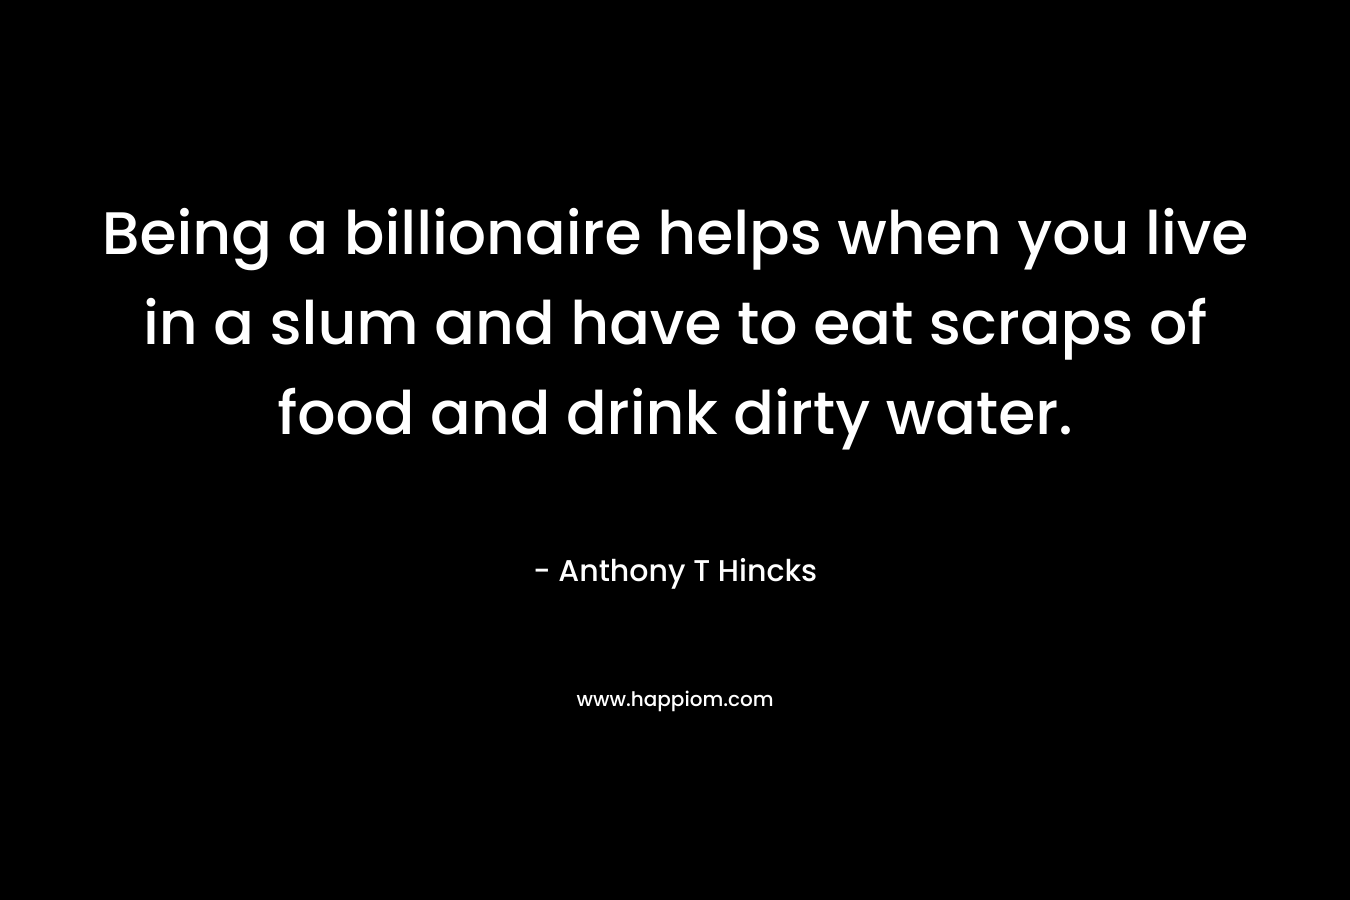 Being a billionaire helps when you live in a slum and have to eat scraps of food and drink dirty water.